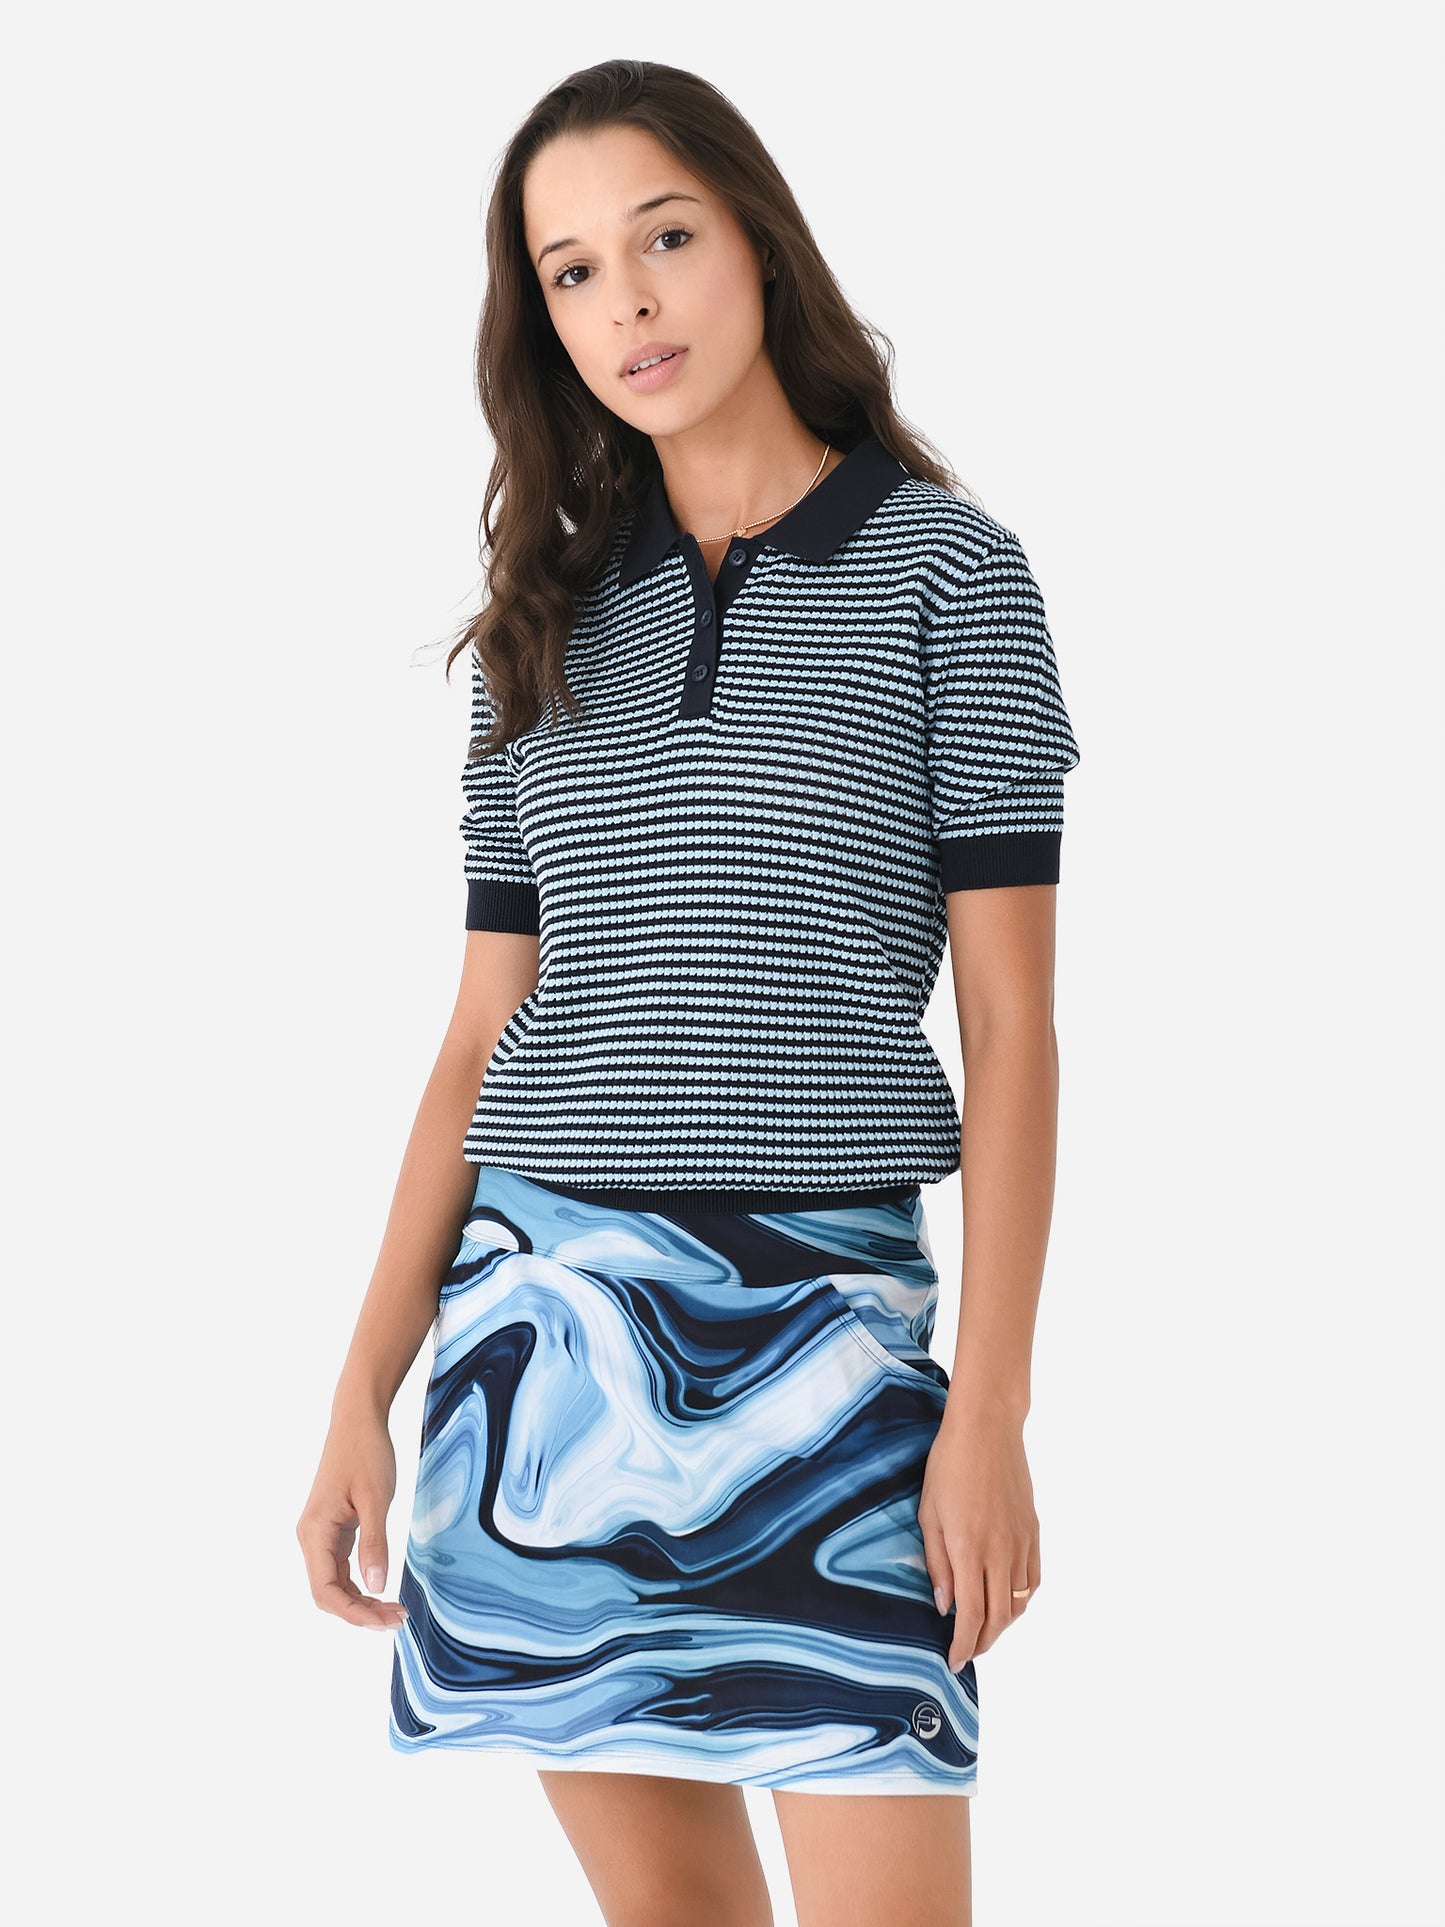 Foray Golf Women's Textured Knit Polo